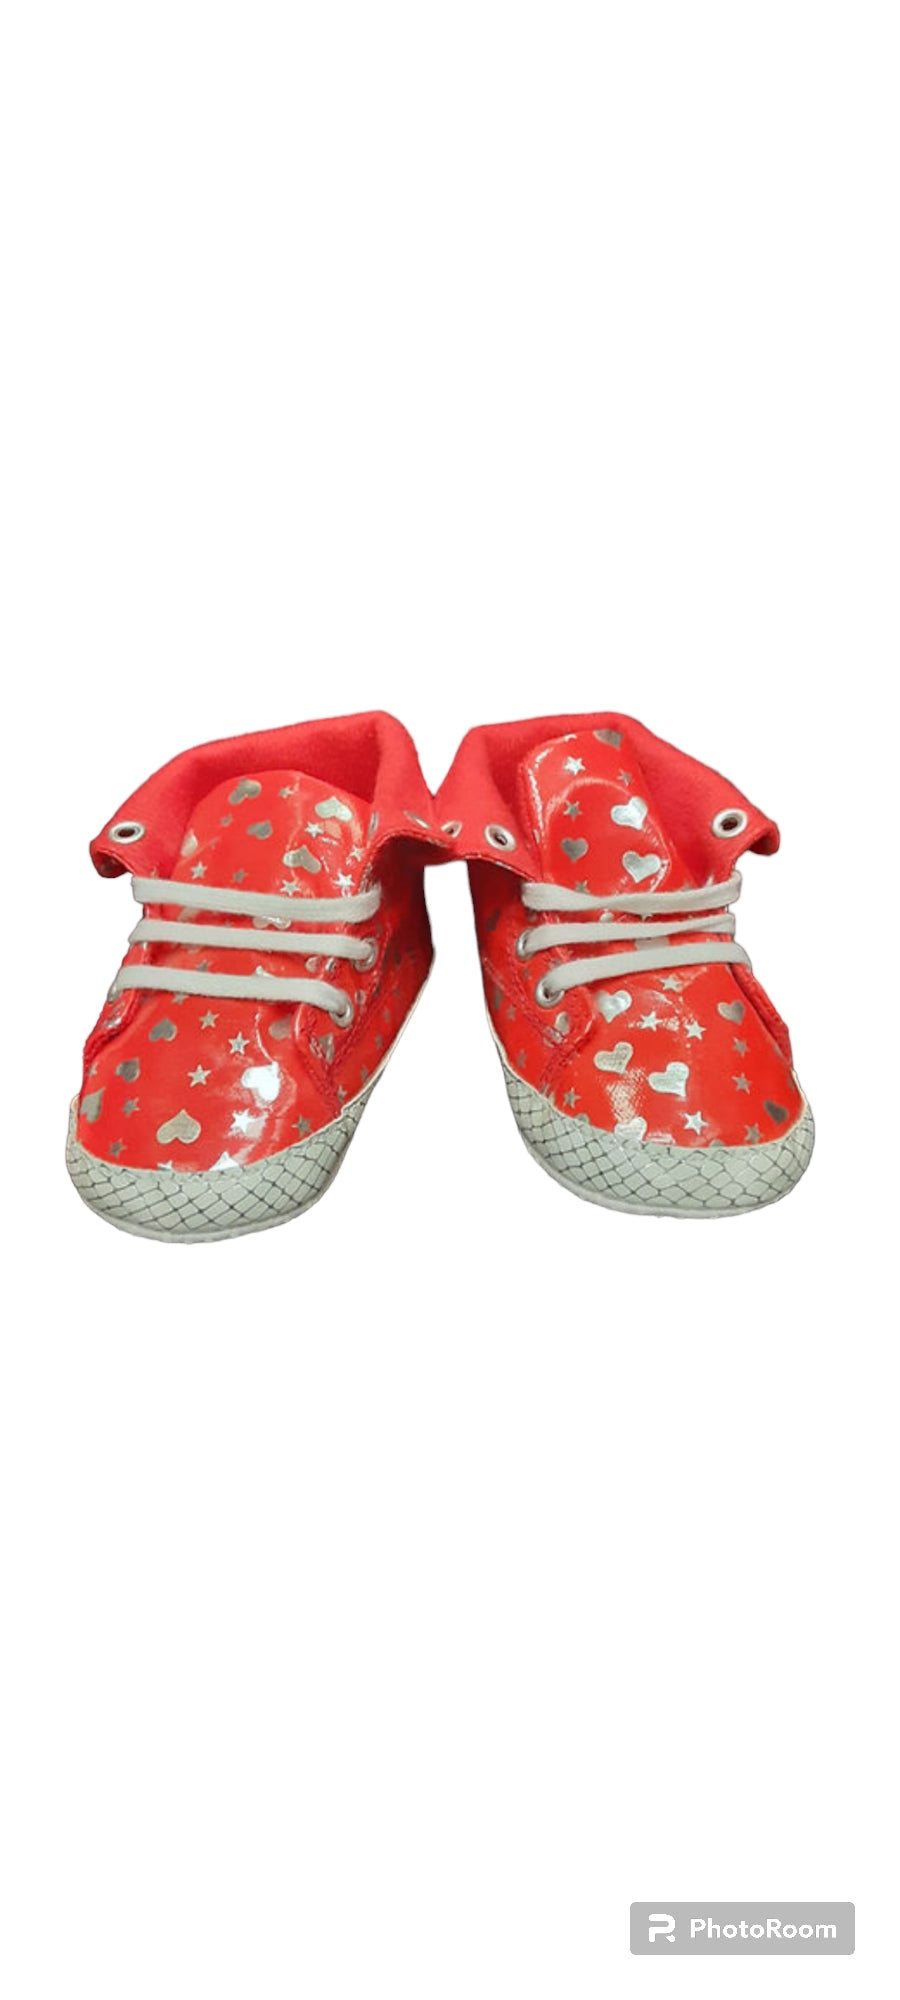 Red Heart Baby Shoes